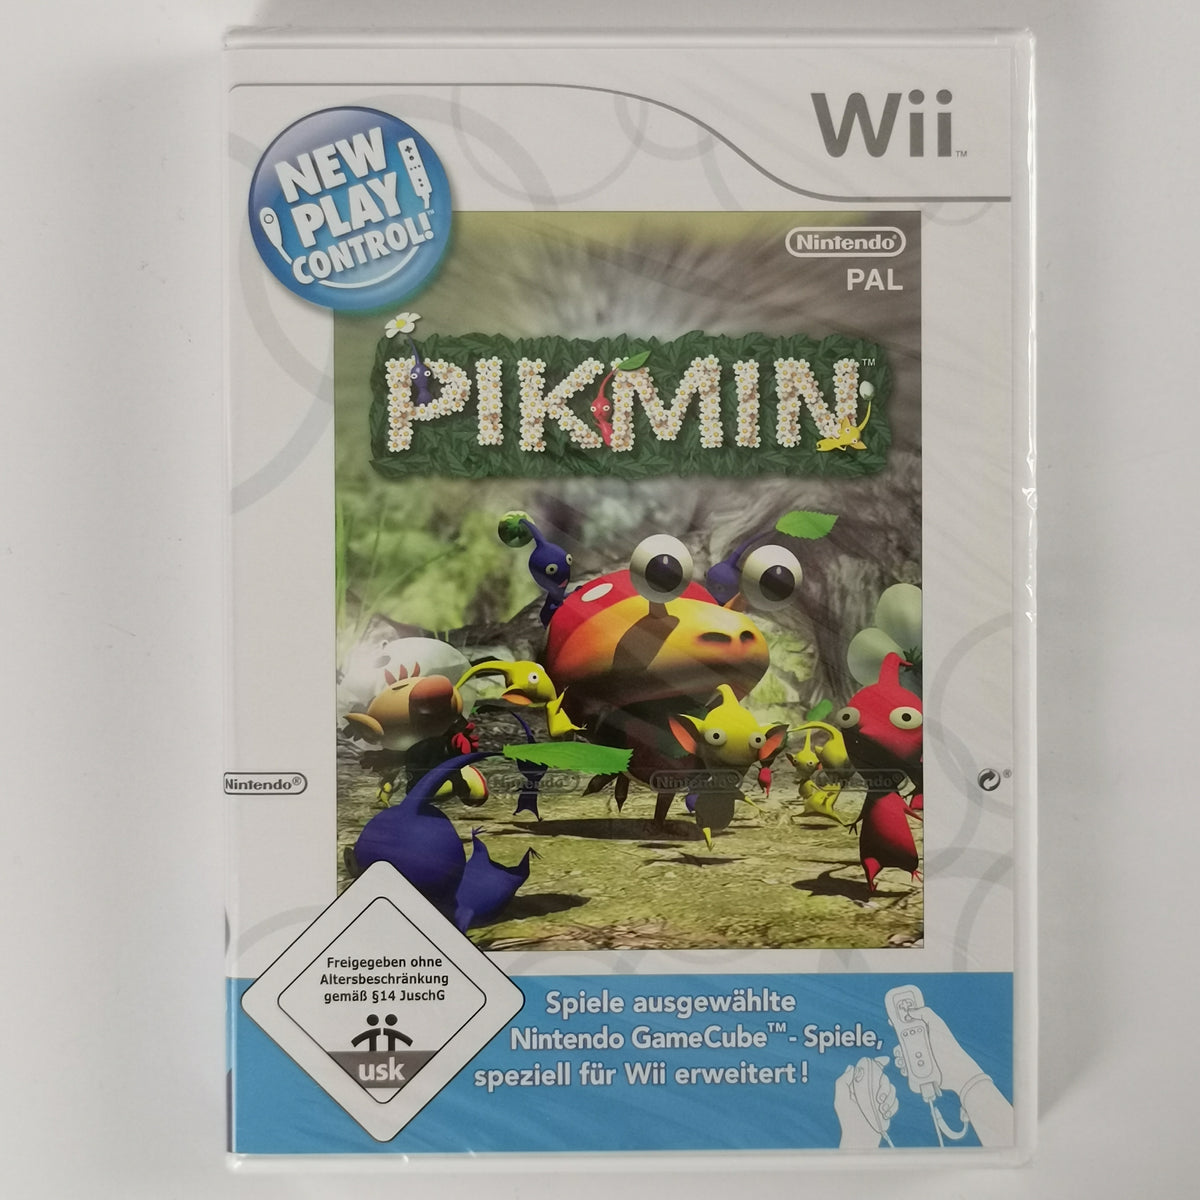 Pikmin   New Play Control! [Wii]